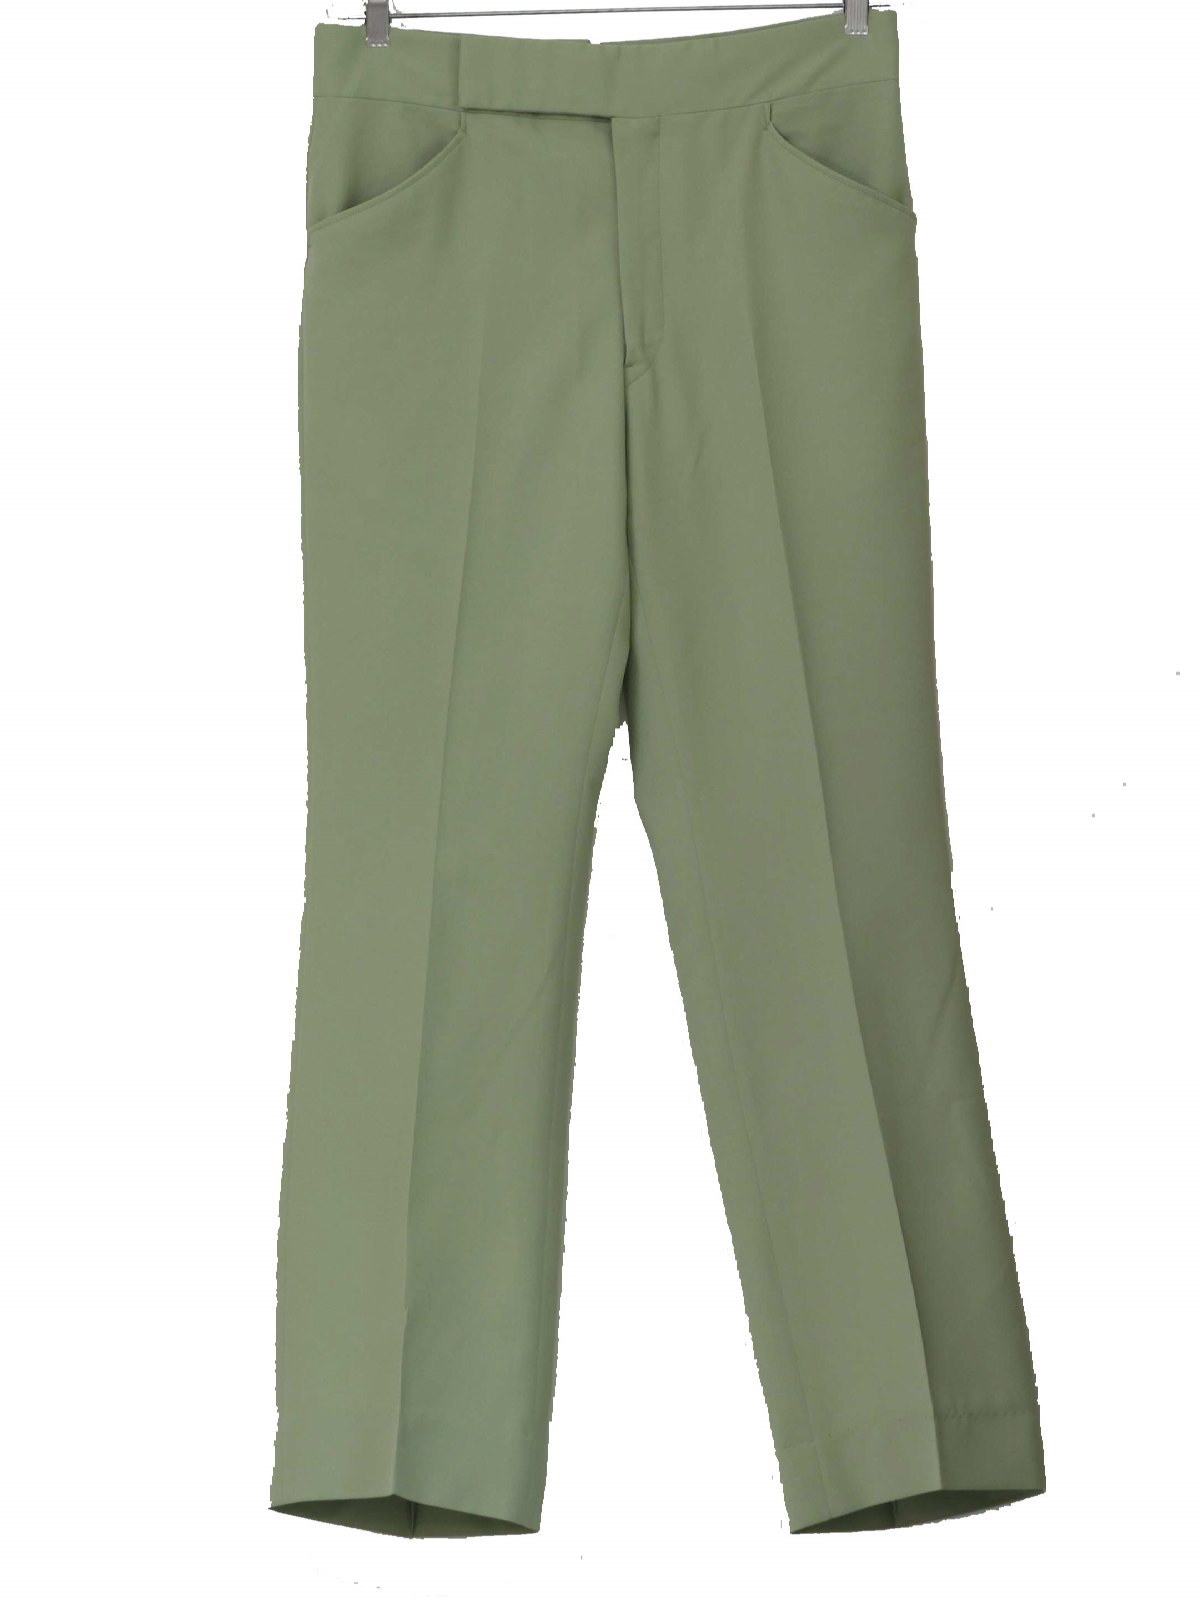 1970s Vintage Flared Pants / Flares: 70s -Seilers- Mens pale lime green ...